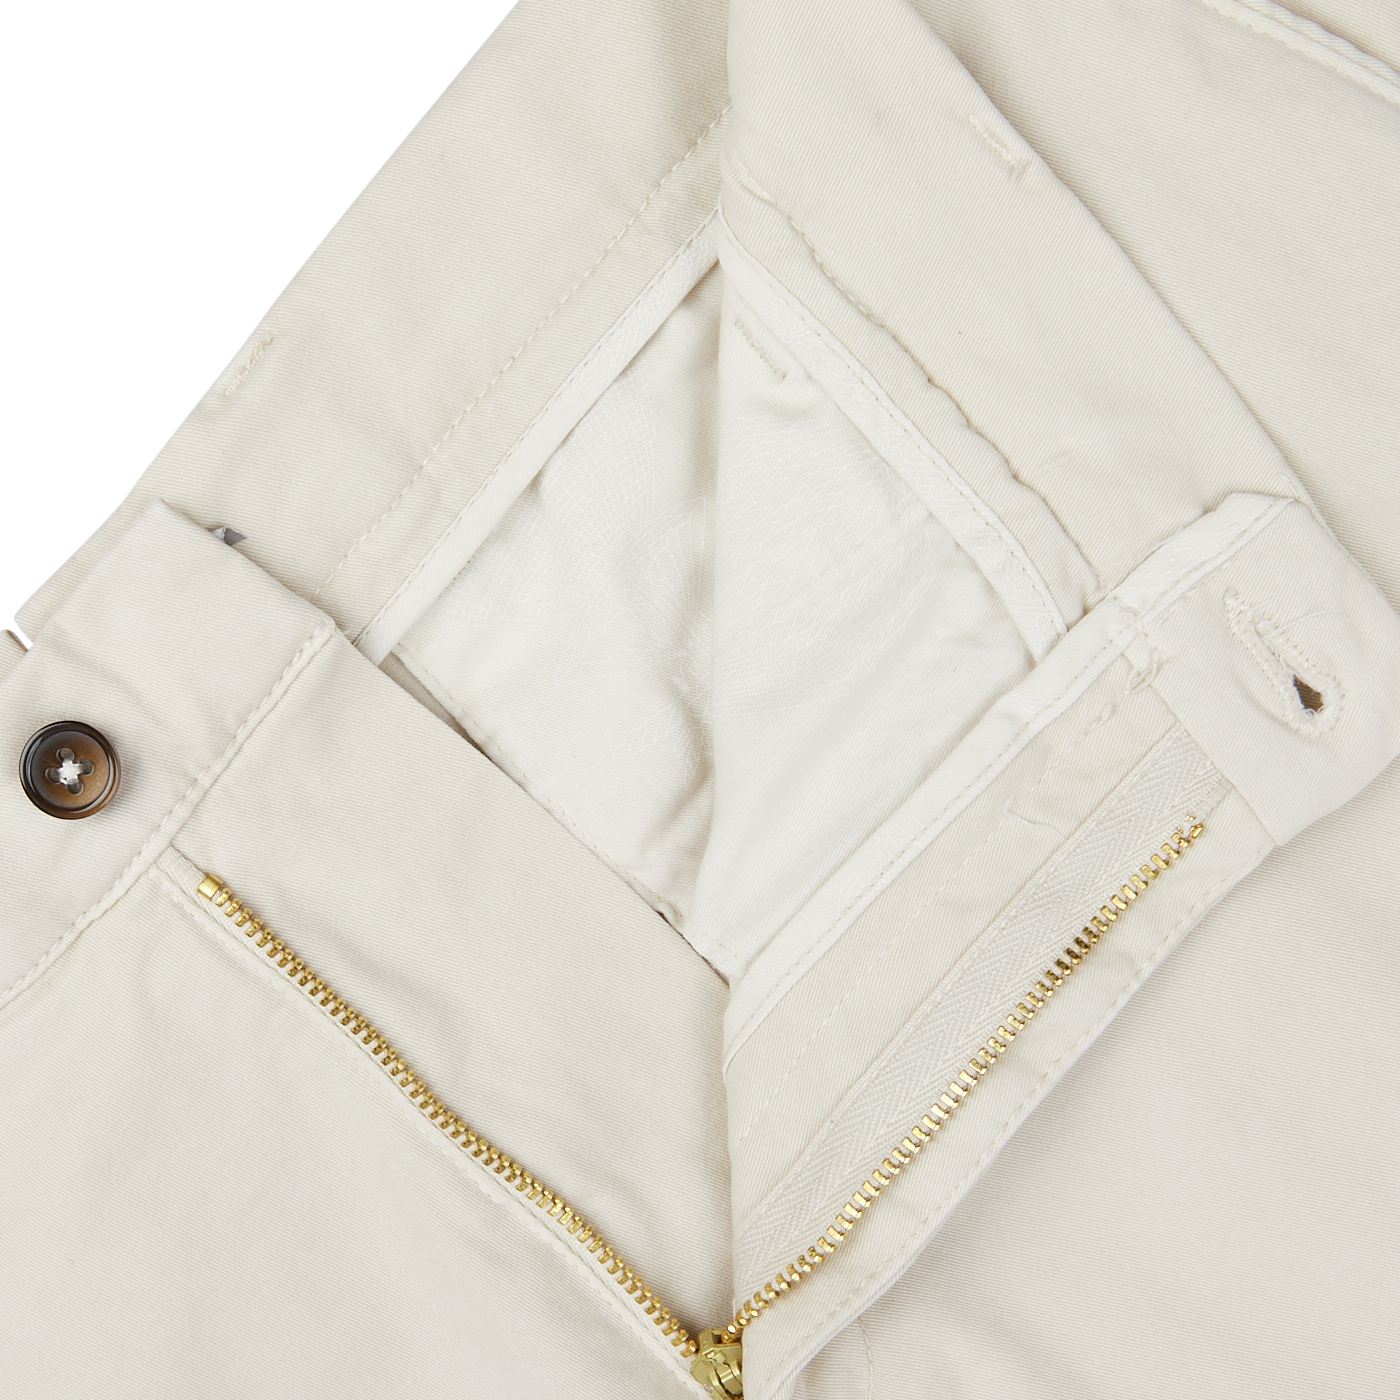 Close-up of Berwich cream beige cotton blend Bermuda shorts with zipper detail, perfect for a summer vacation.